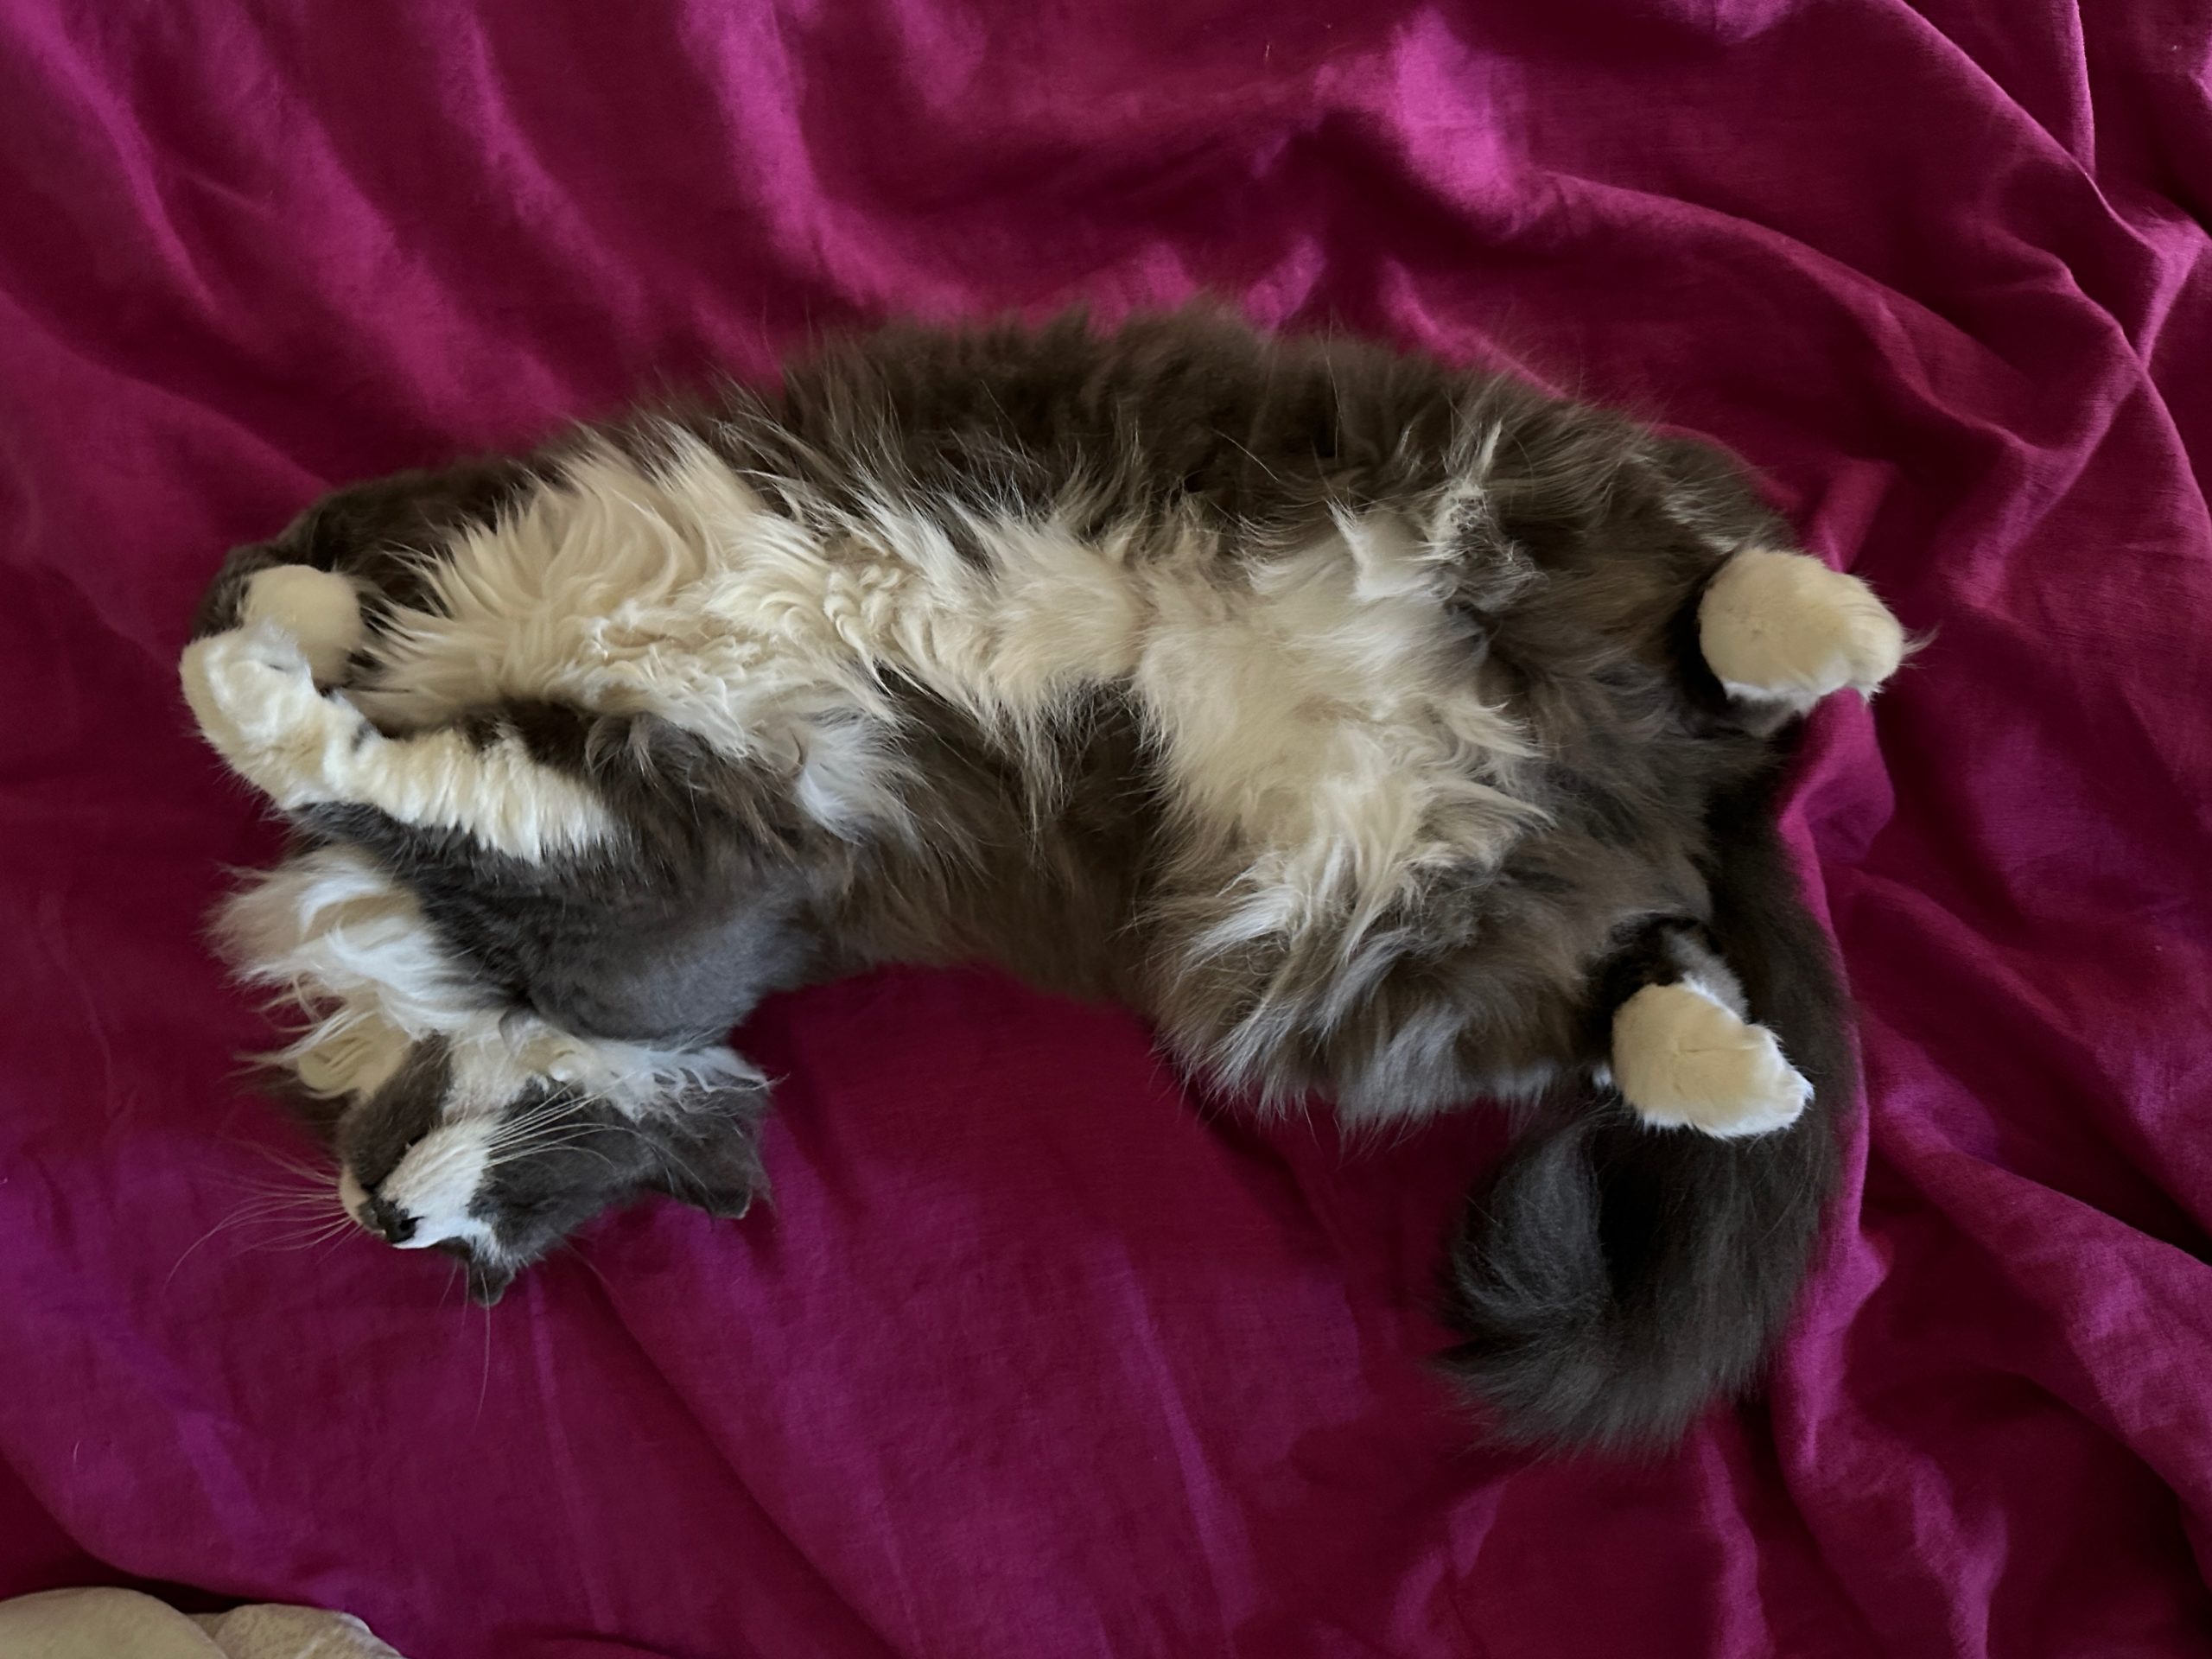 A fluffy grey-and-white-cat, sprawled belly-up on a magenta bedspread